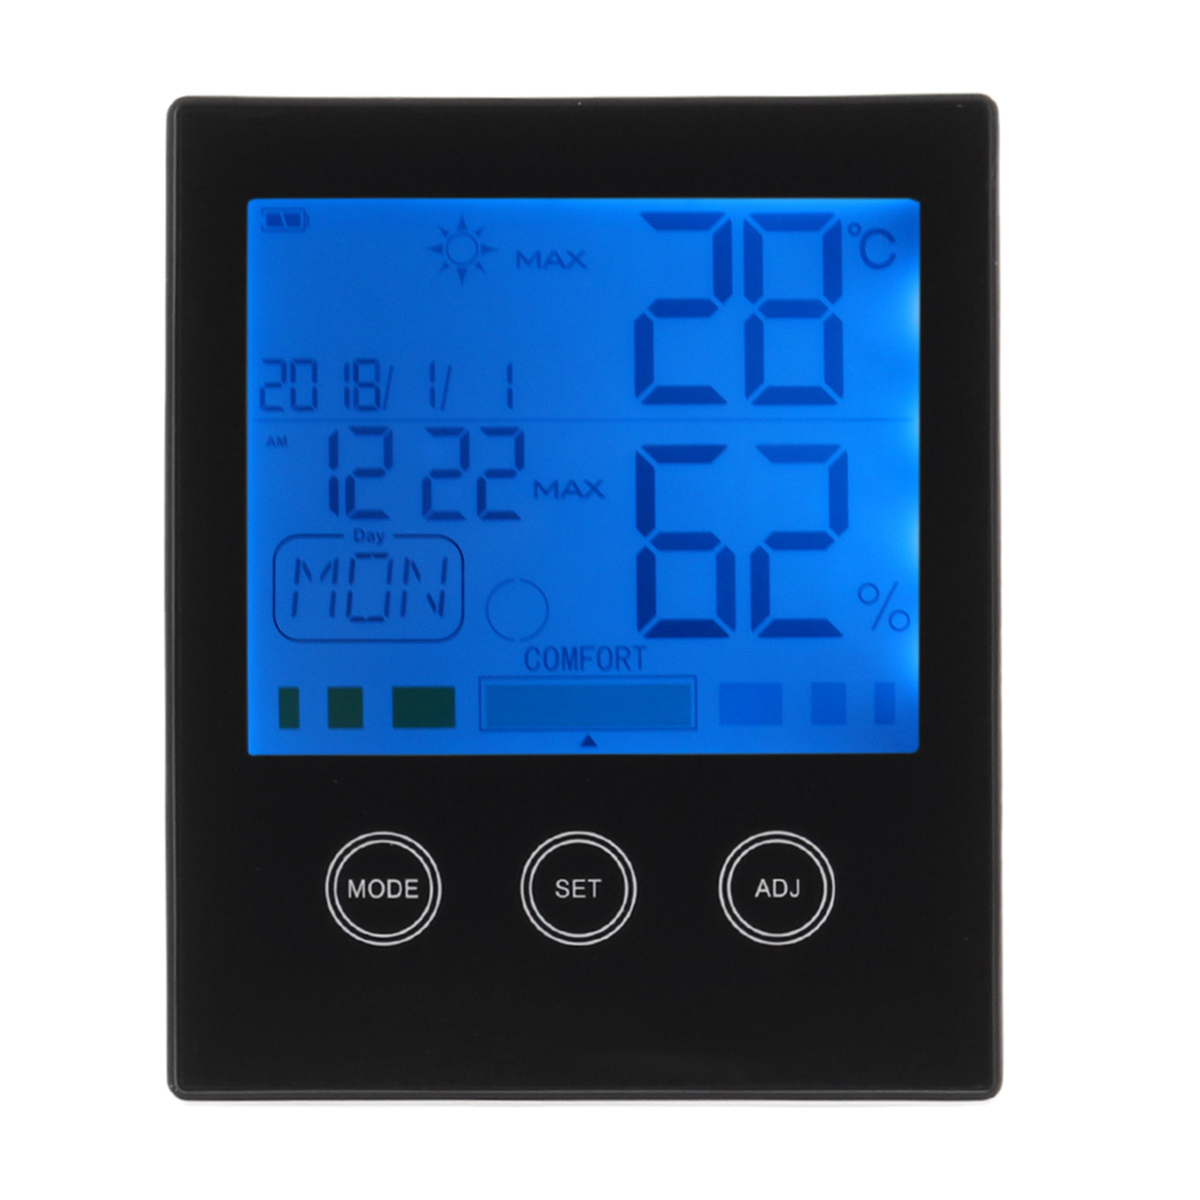 CH-909 Large LCD Digital Thermometer Hygrometer Temperature Humidity Gauge Alarm Clock Thermometer 2